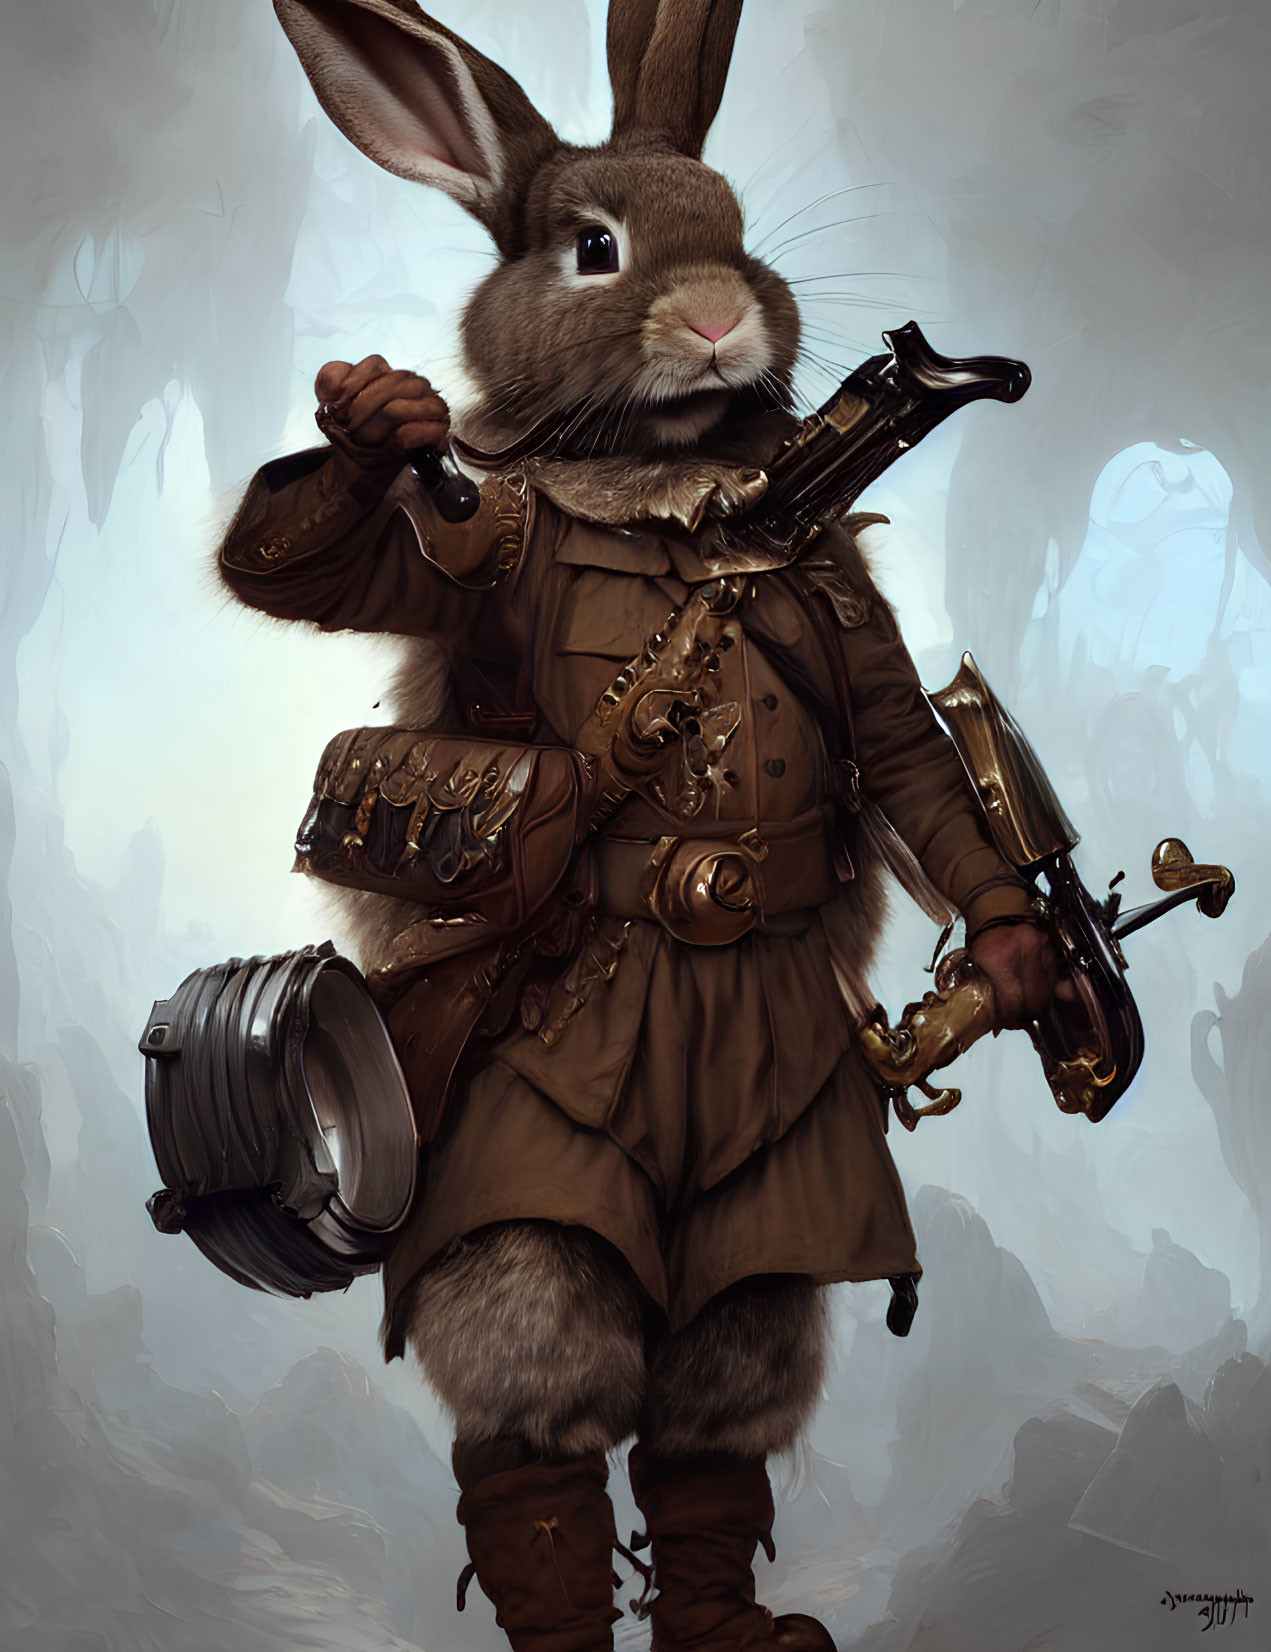 Steampunk-themed anthropomorphic rabbit with sword, pistol, and mechanical arm